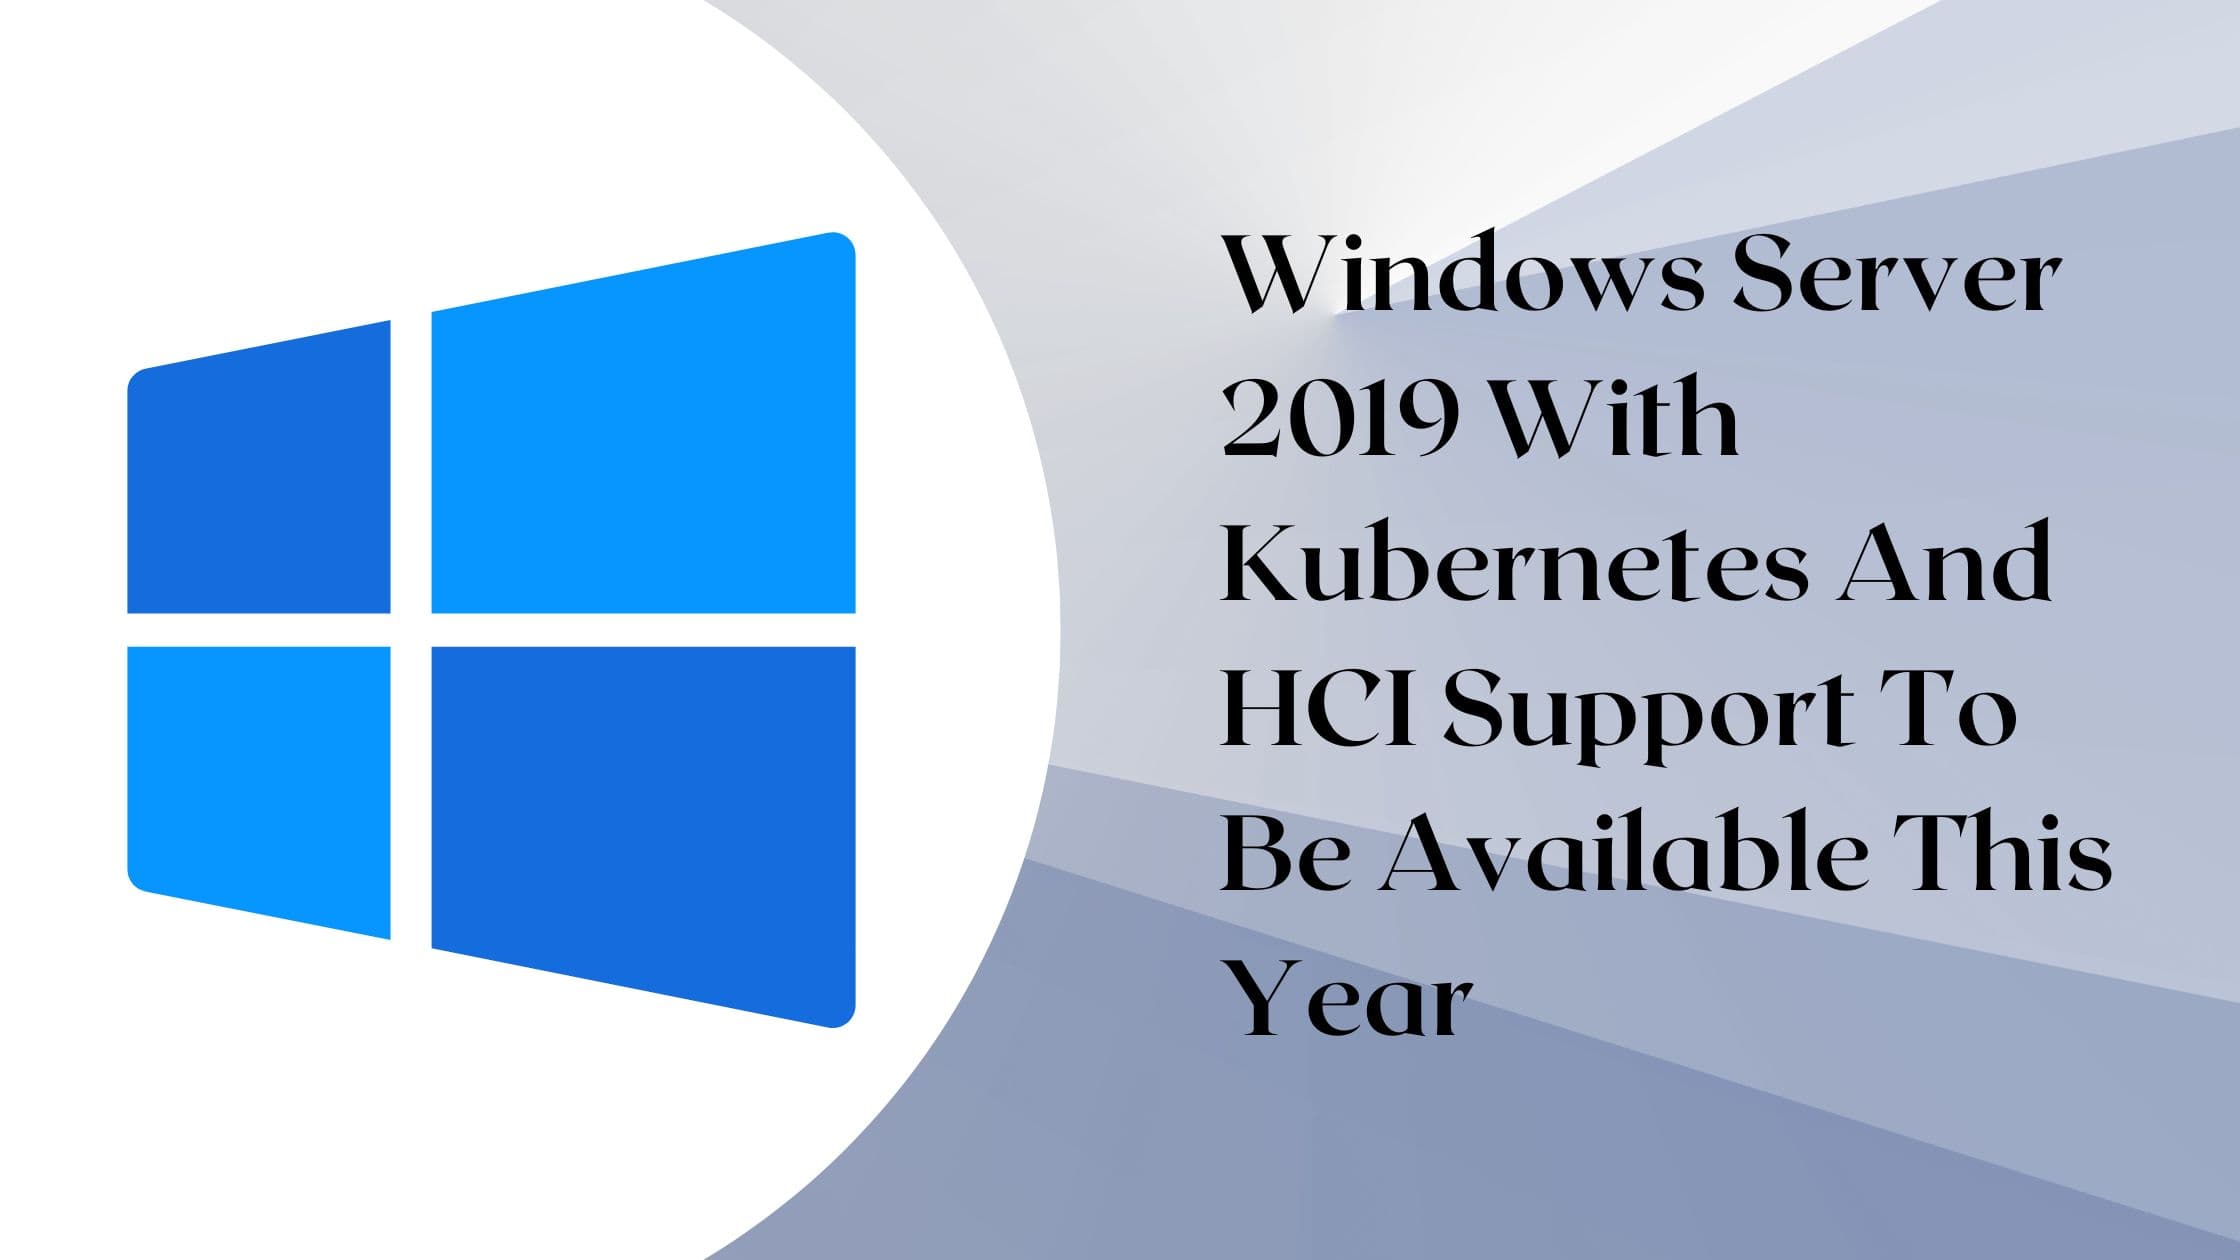 Windows Server 2019 with Kubernetes and HCI support to be available this year